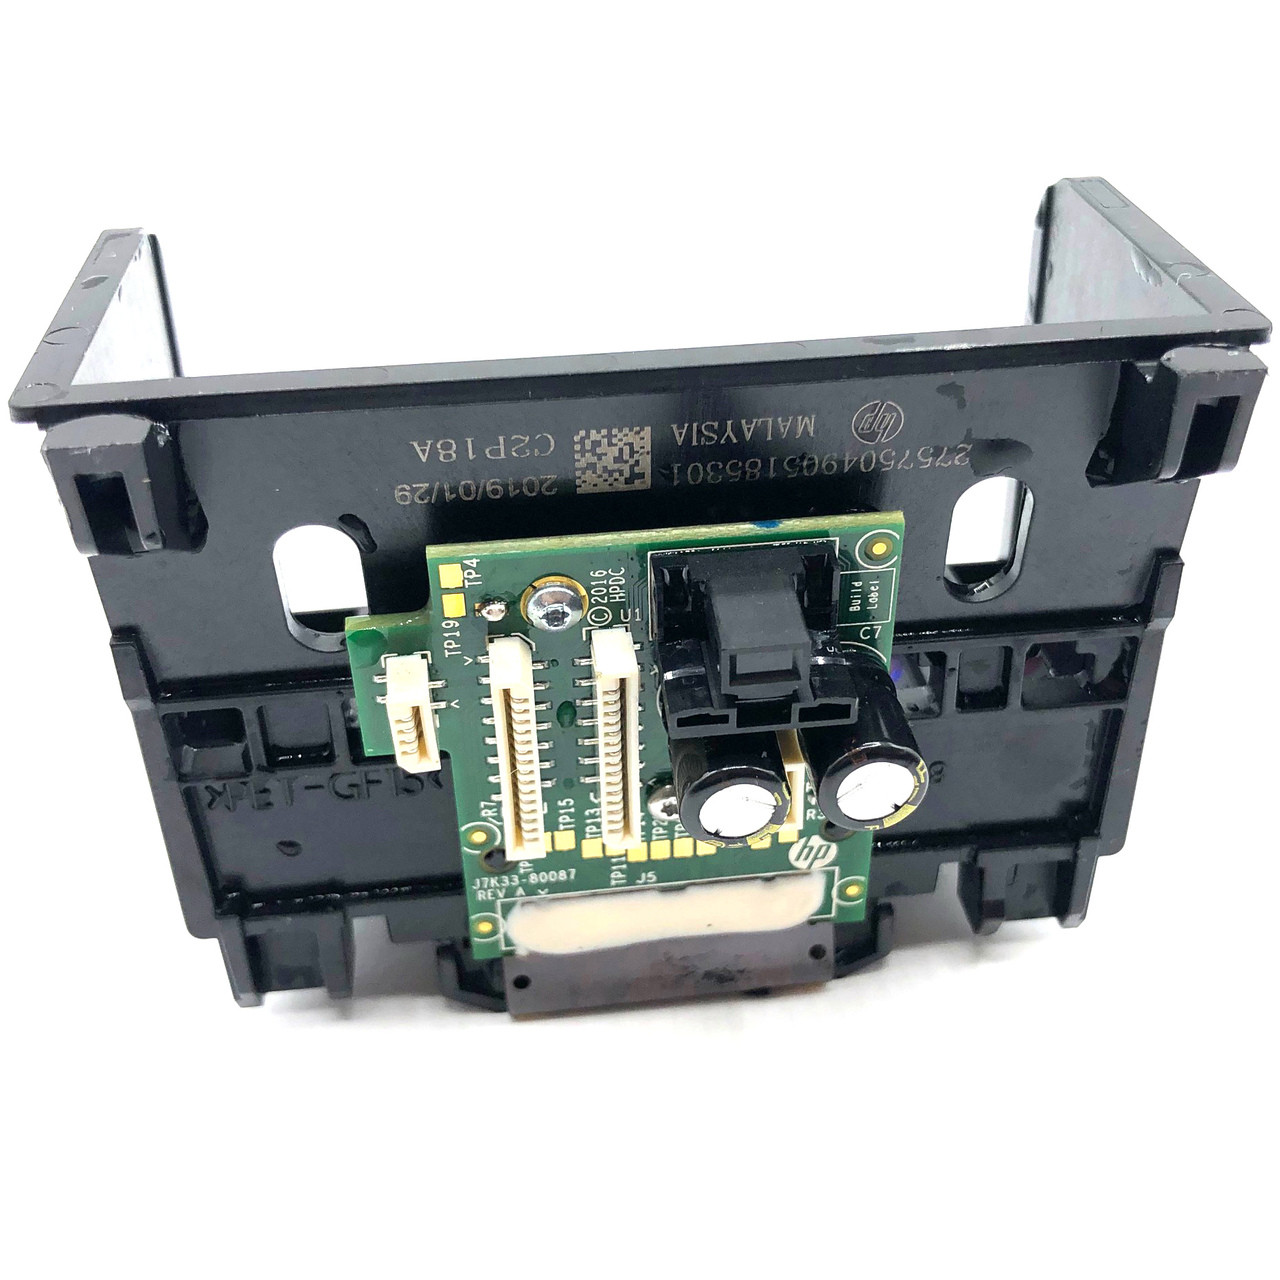 New HP 910 916 Printhead for HP OfficeJet Pro 8022 8025 8028 8035